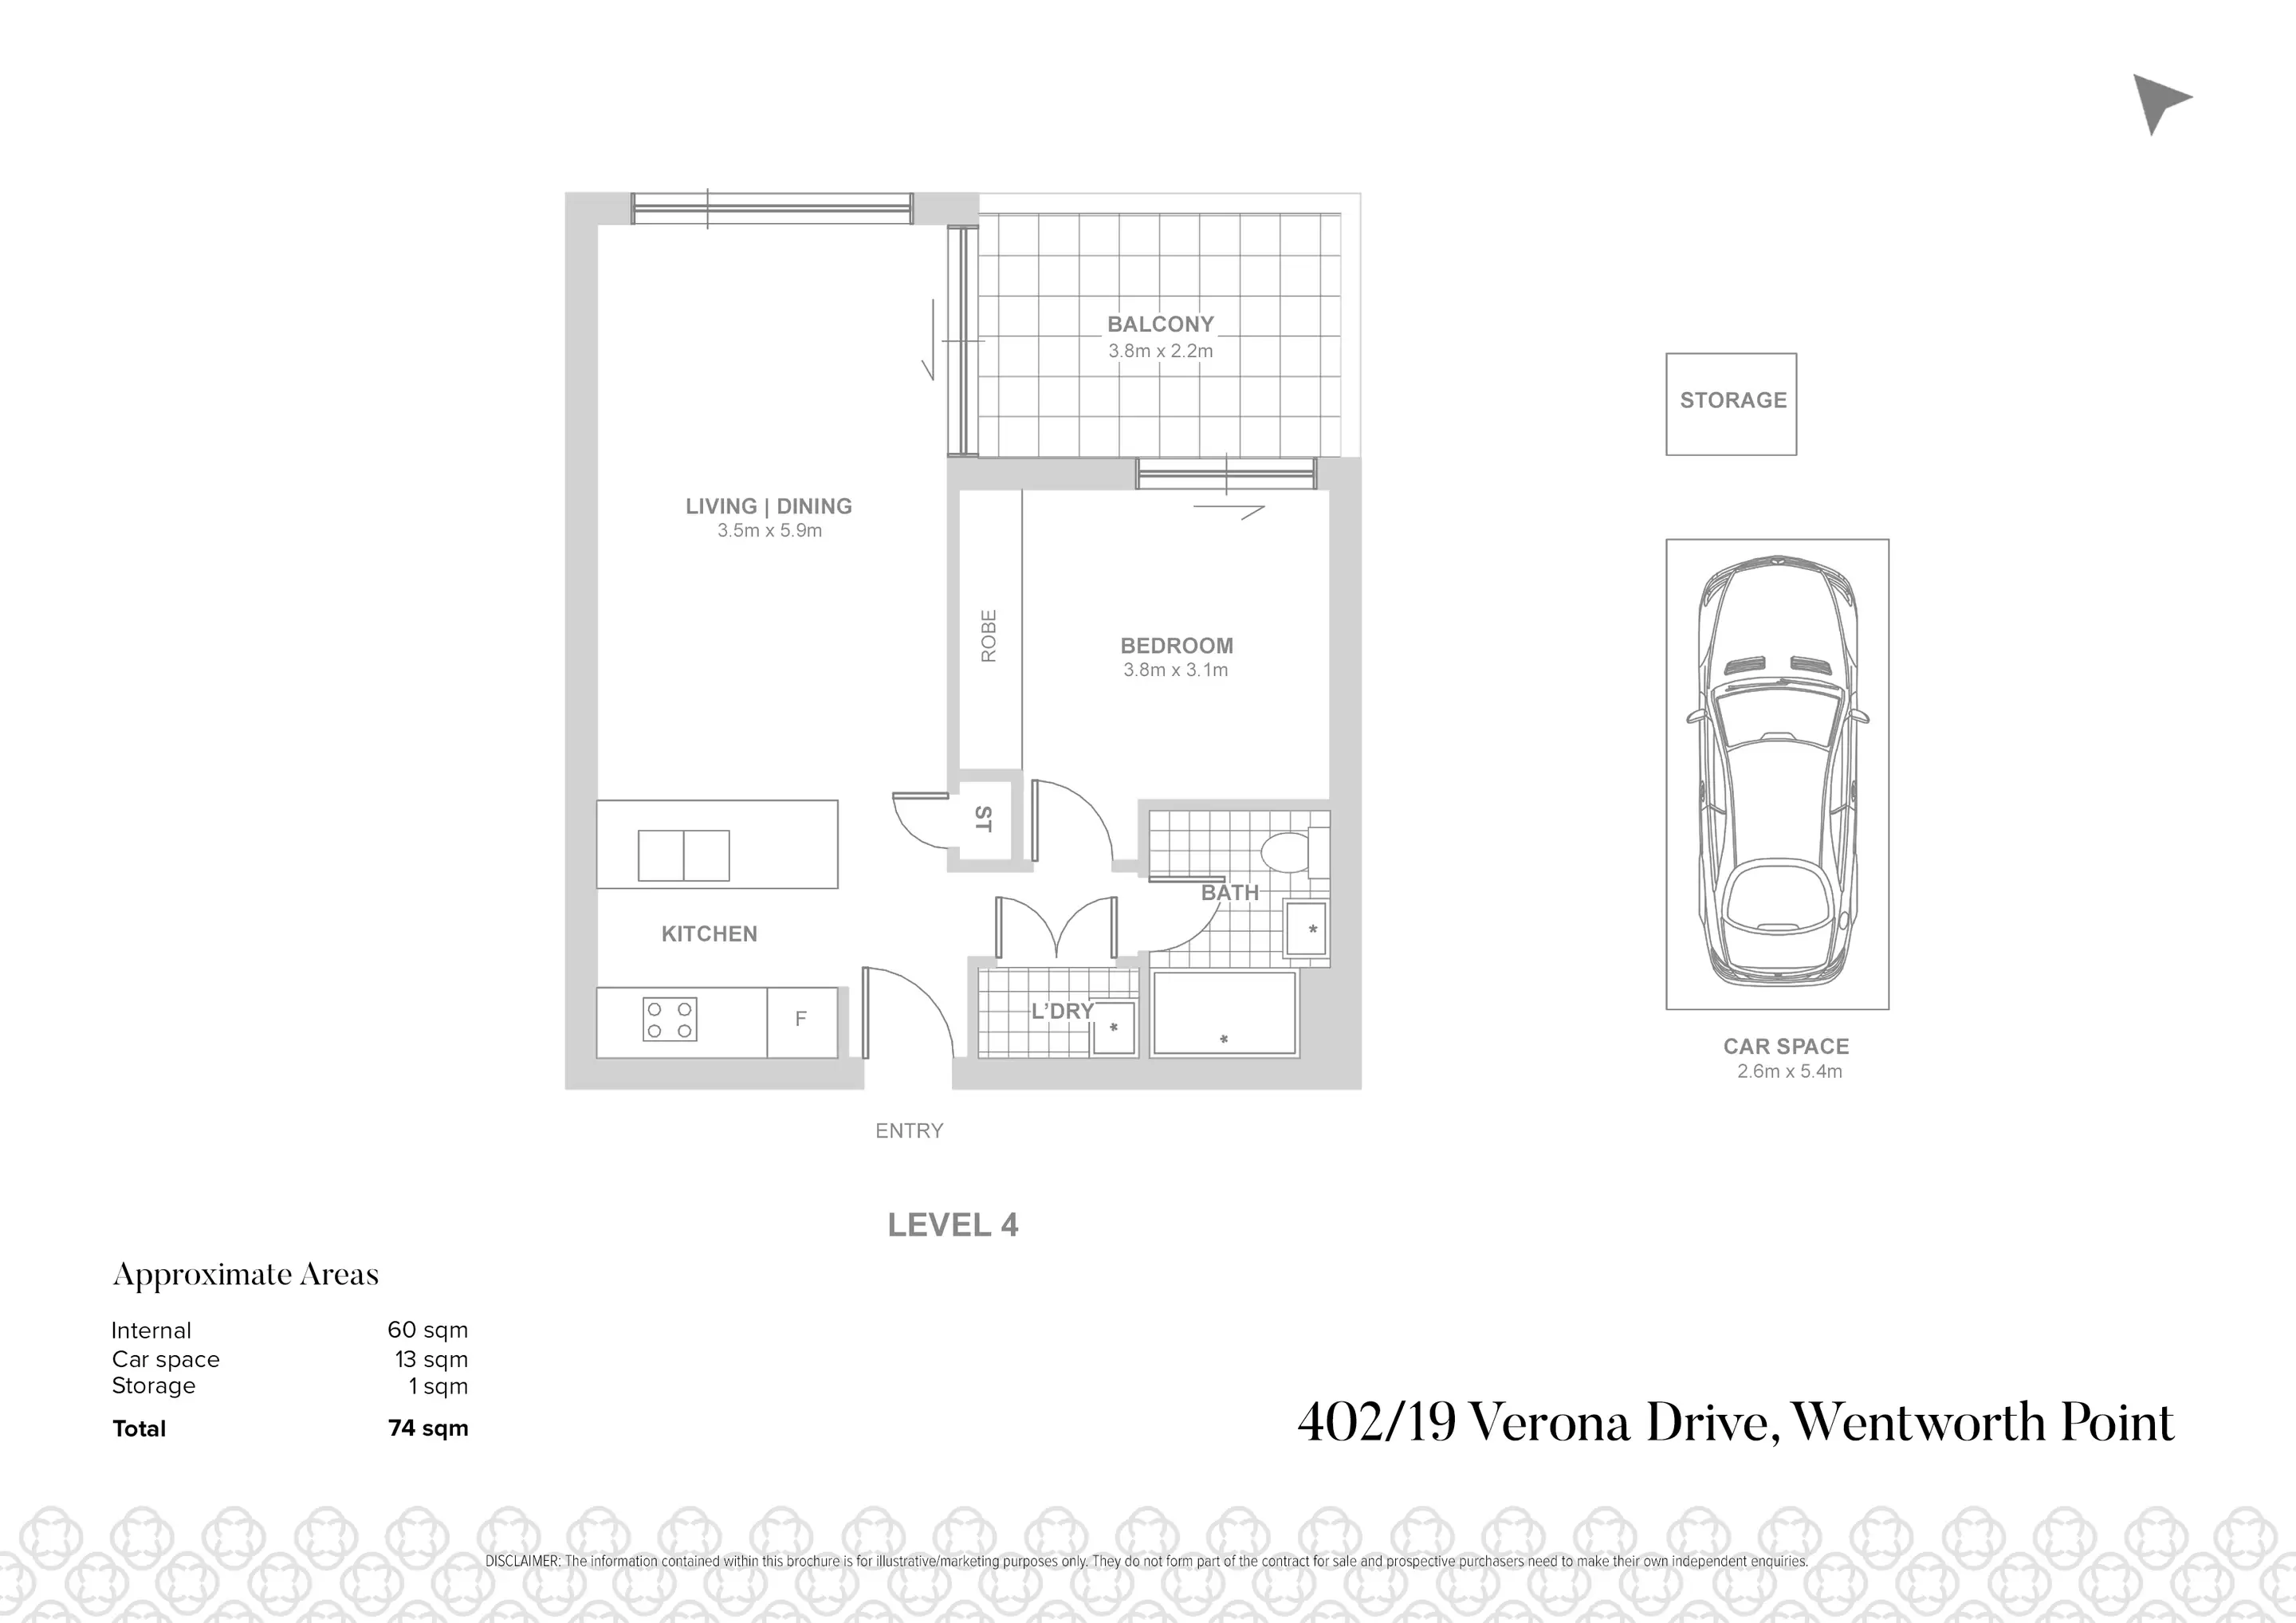 402/19 Verona Drive, Wentworth Point Leased by Chidiac Realty - floorplan